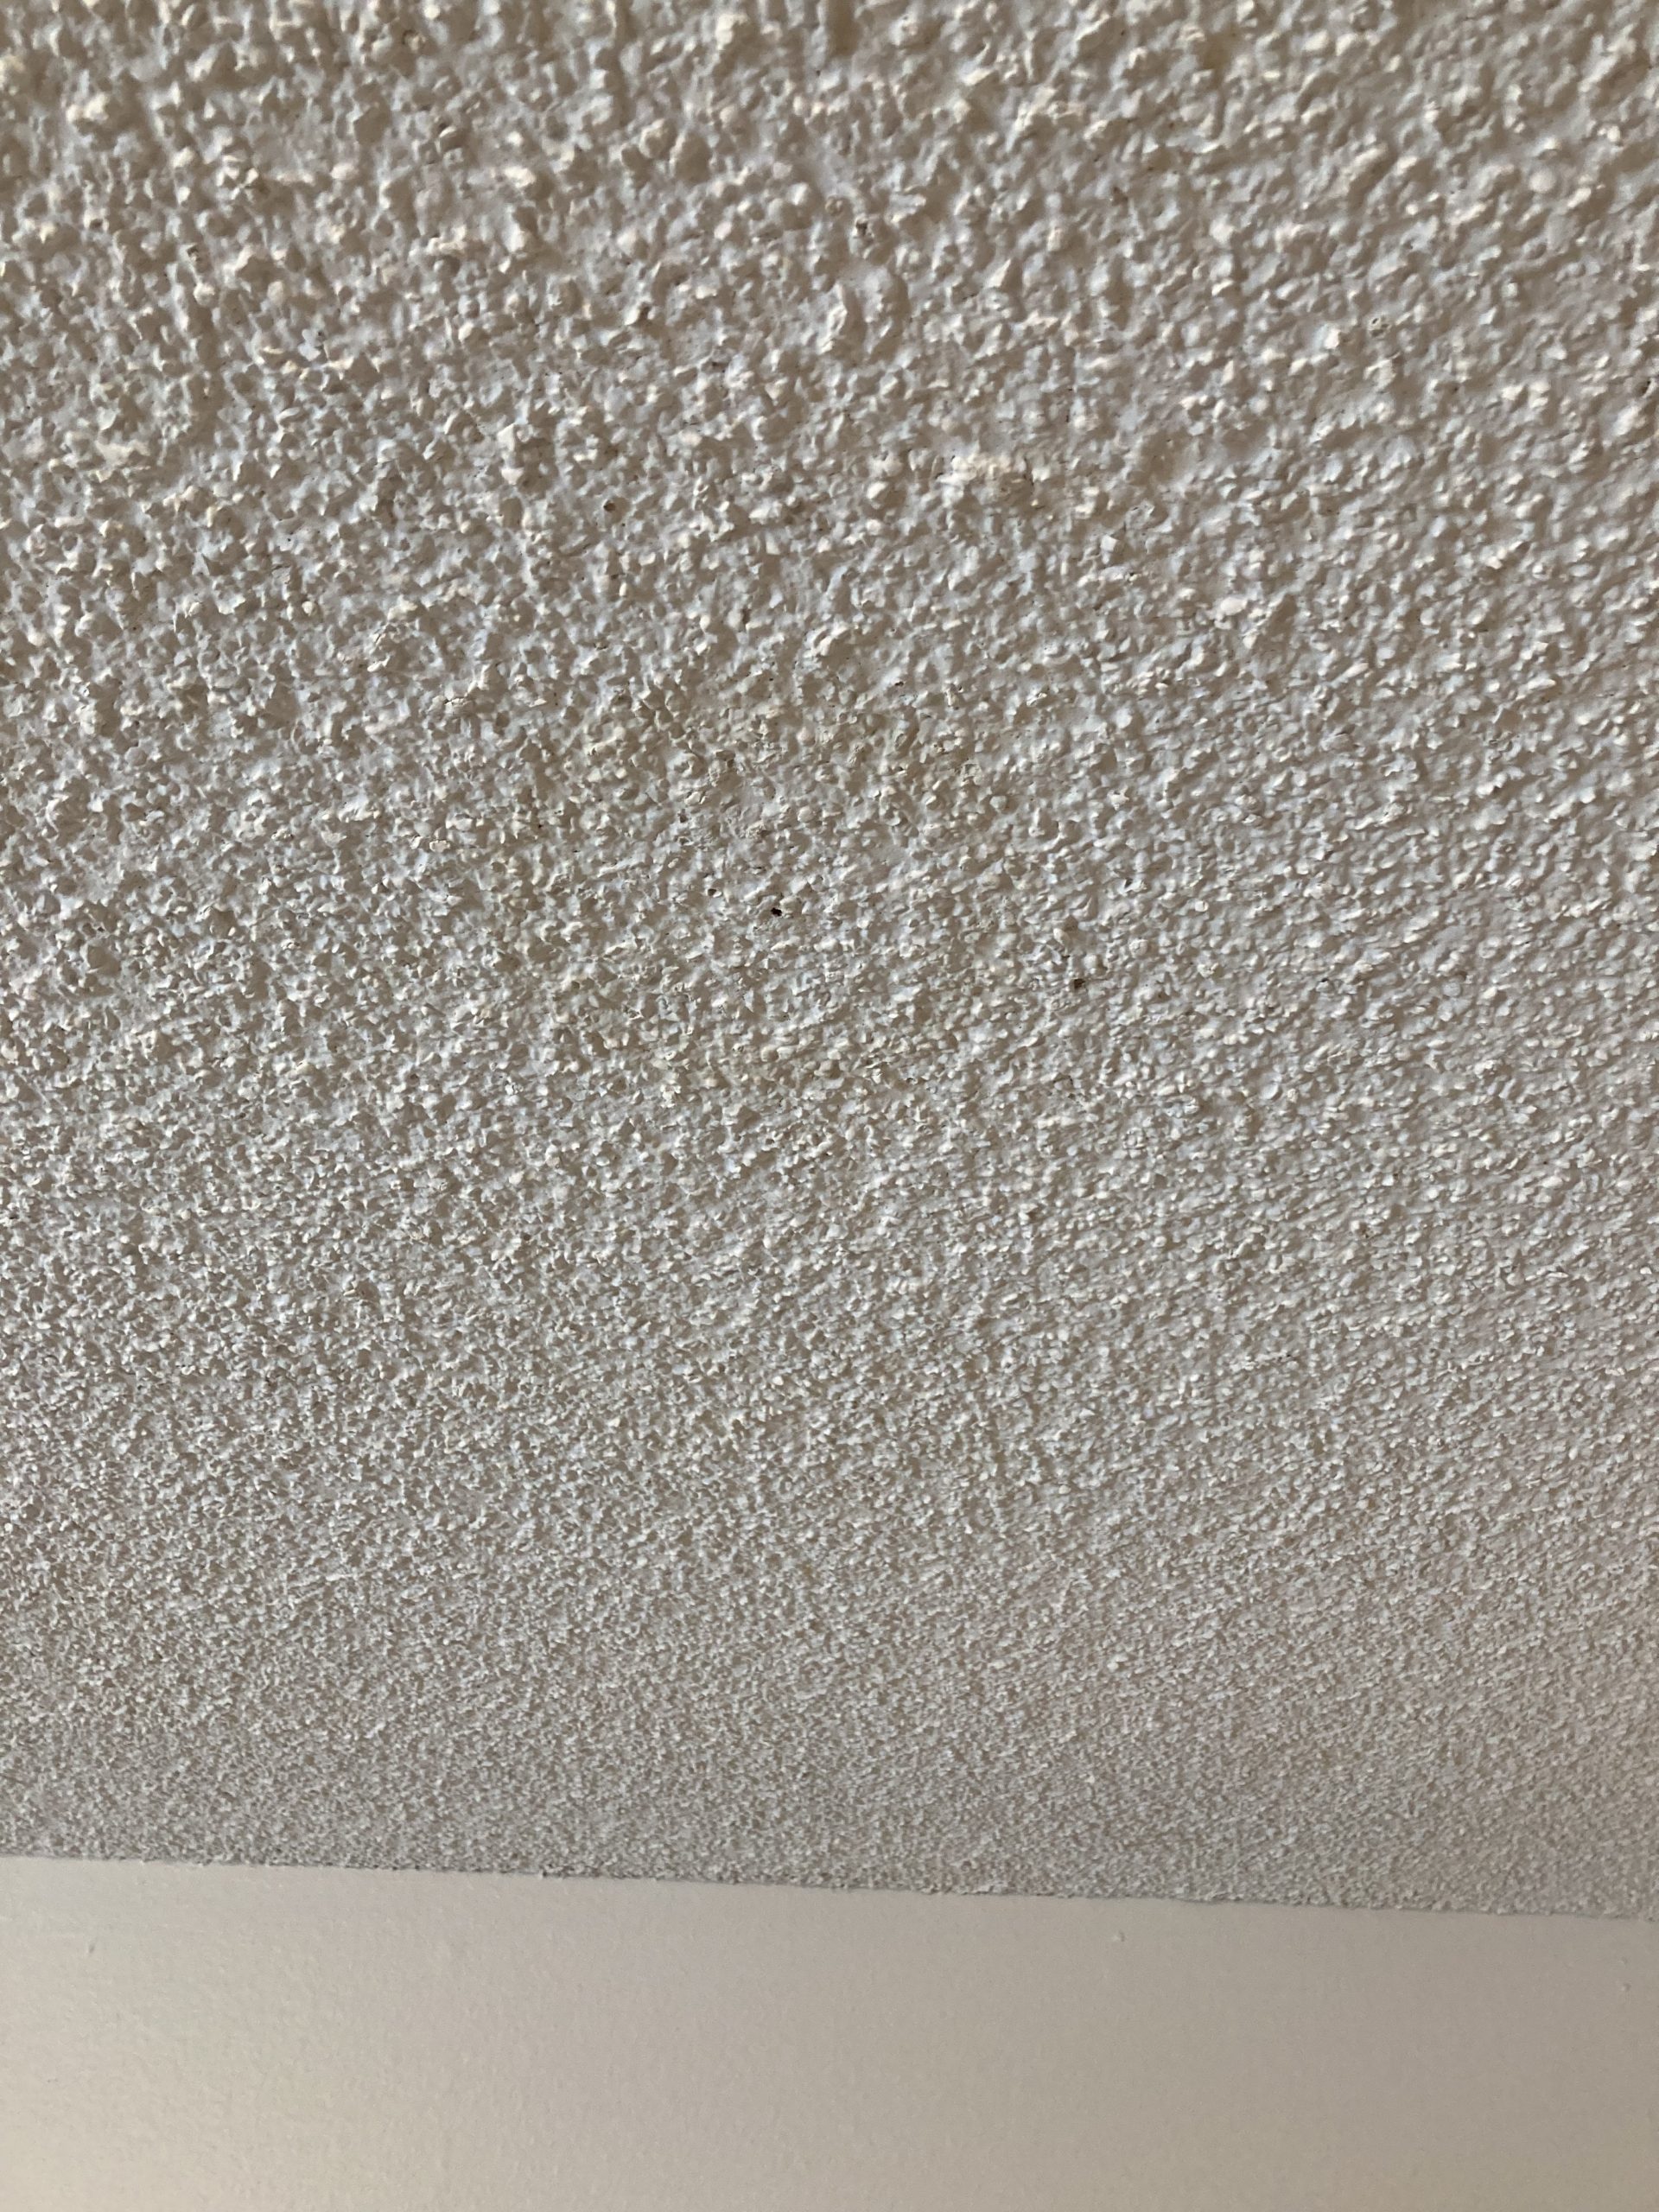 Can you test popcorn ceilings for asbestos?